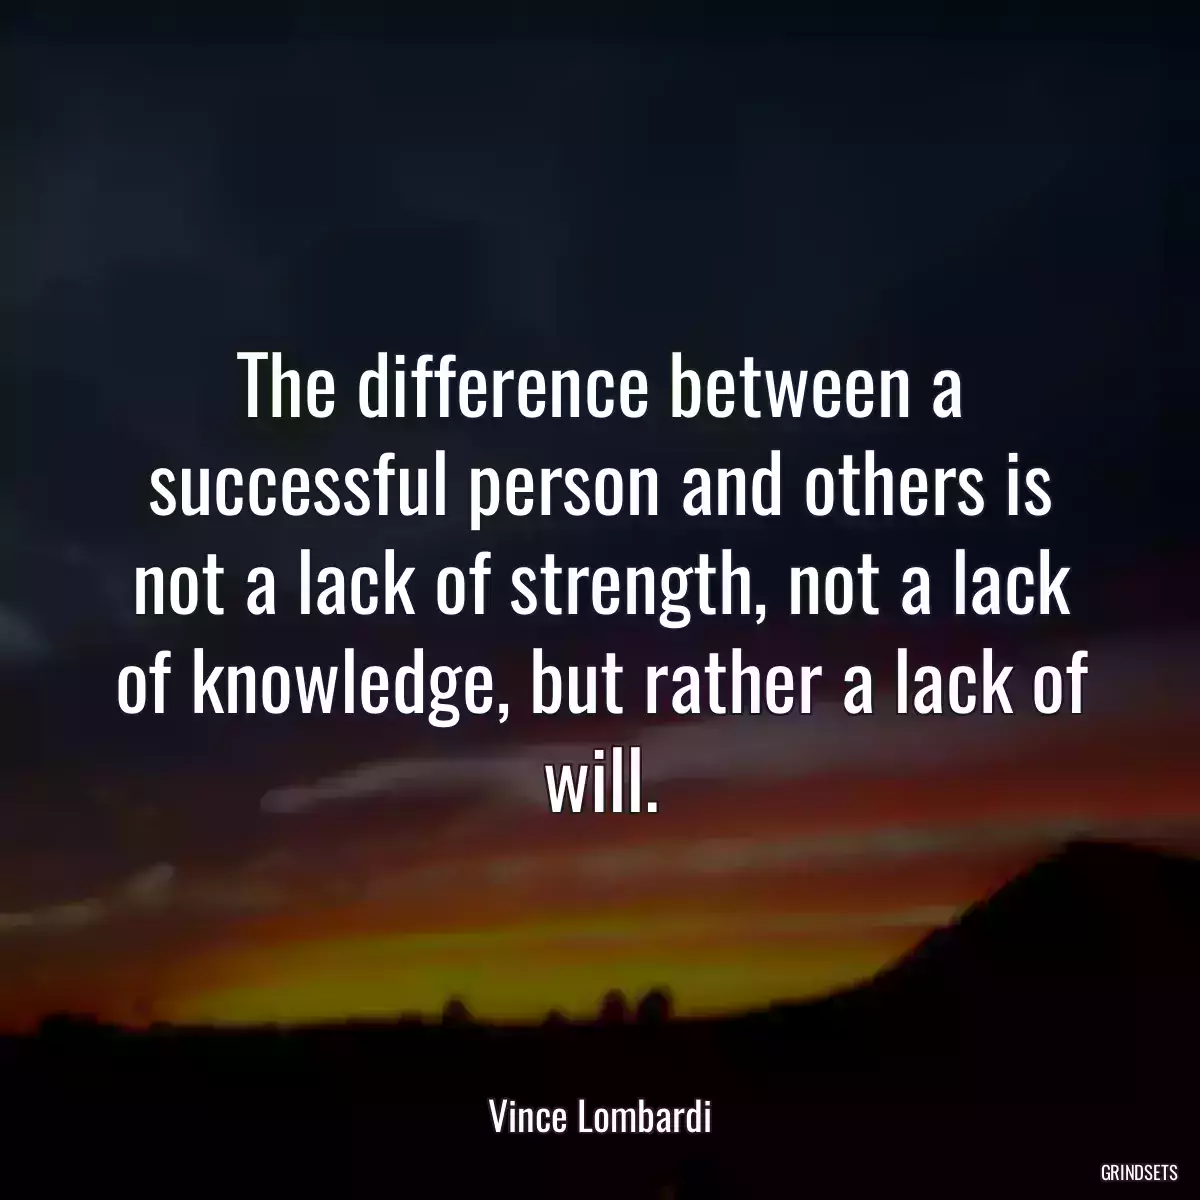 The difference between a successful person and others is not a lack of strength, not a lack of knowledge, but rather a lack of will.